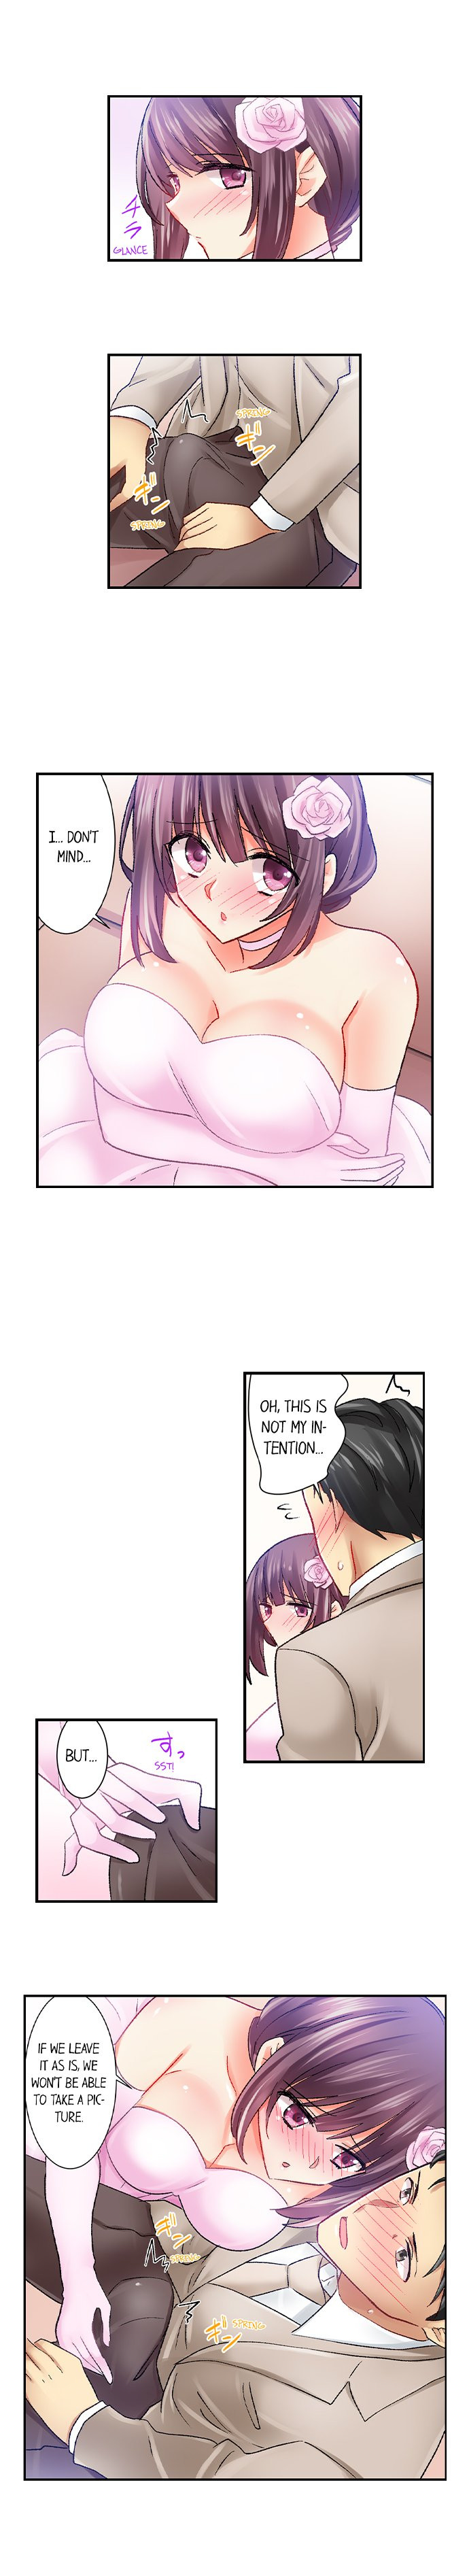 Our Kinky Newlywed Life - Chapter 53 Page 3